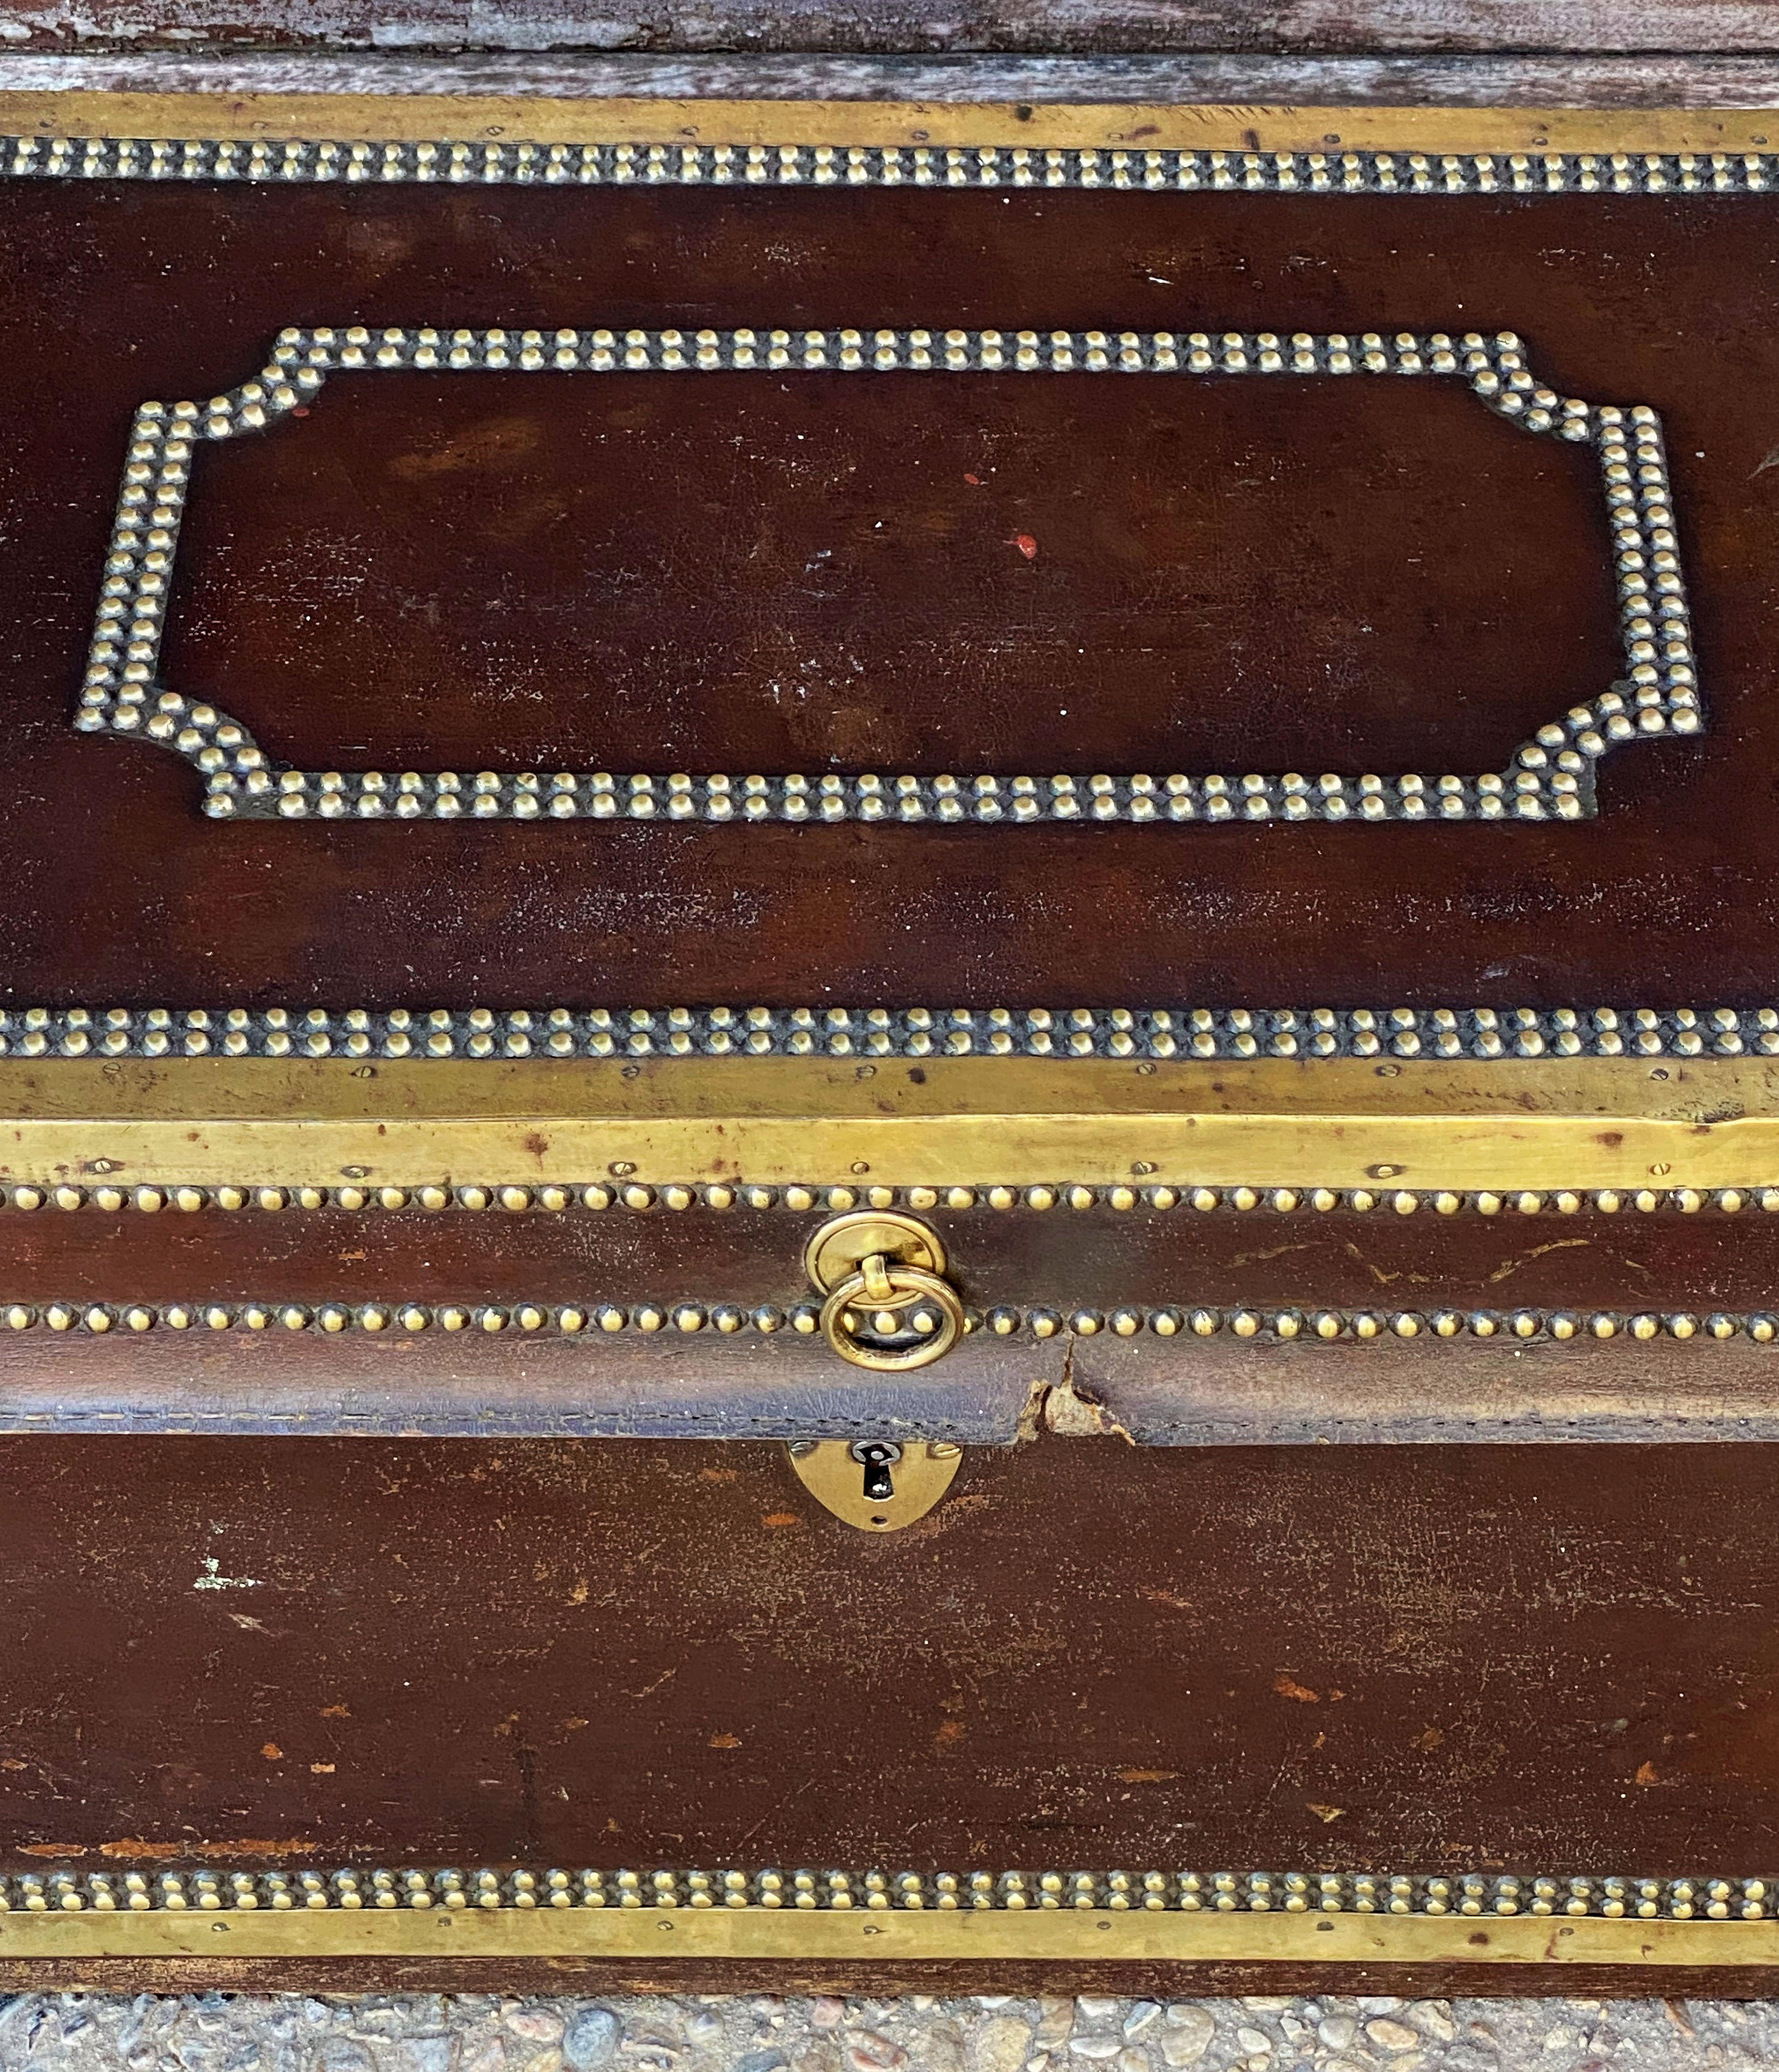 English Campaign Trunk of Brass-Bound Leather and Camphor Wood, circa 1820 For Sale 2